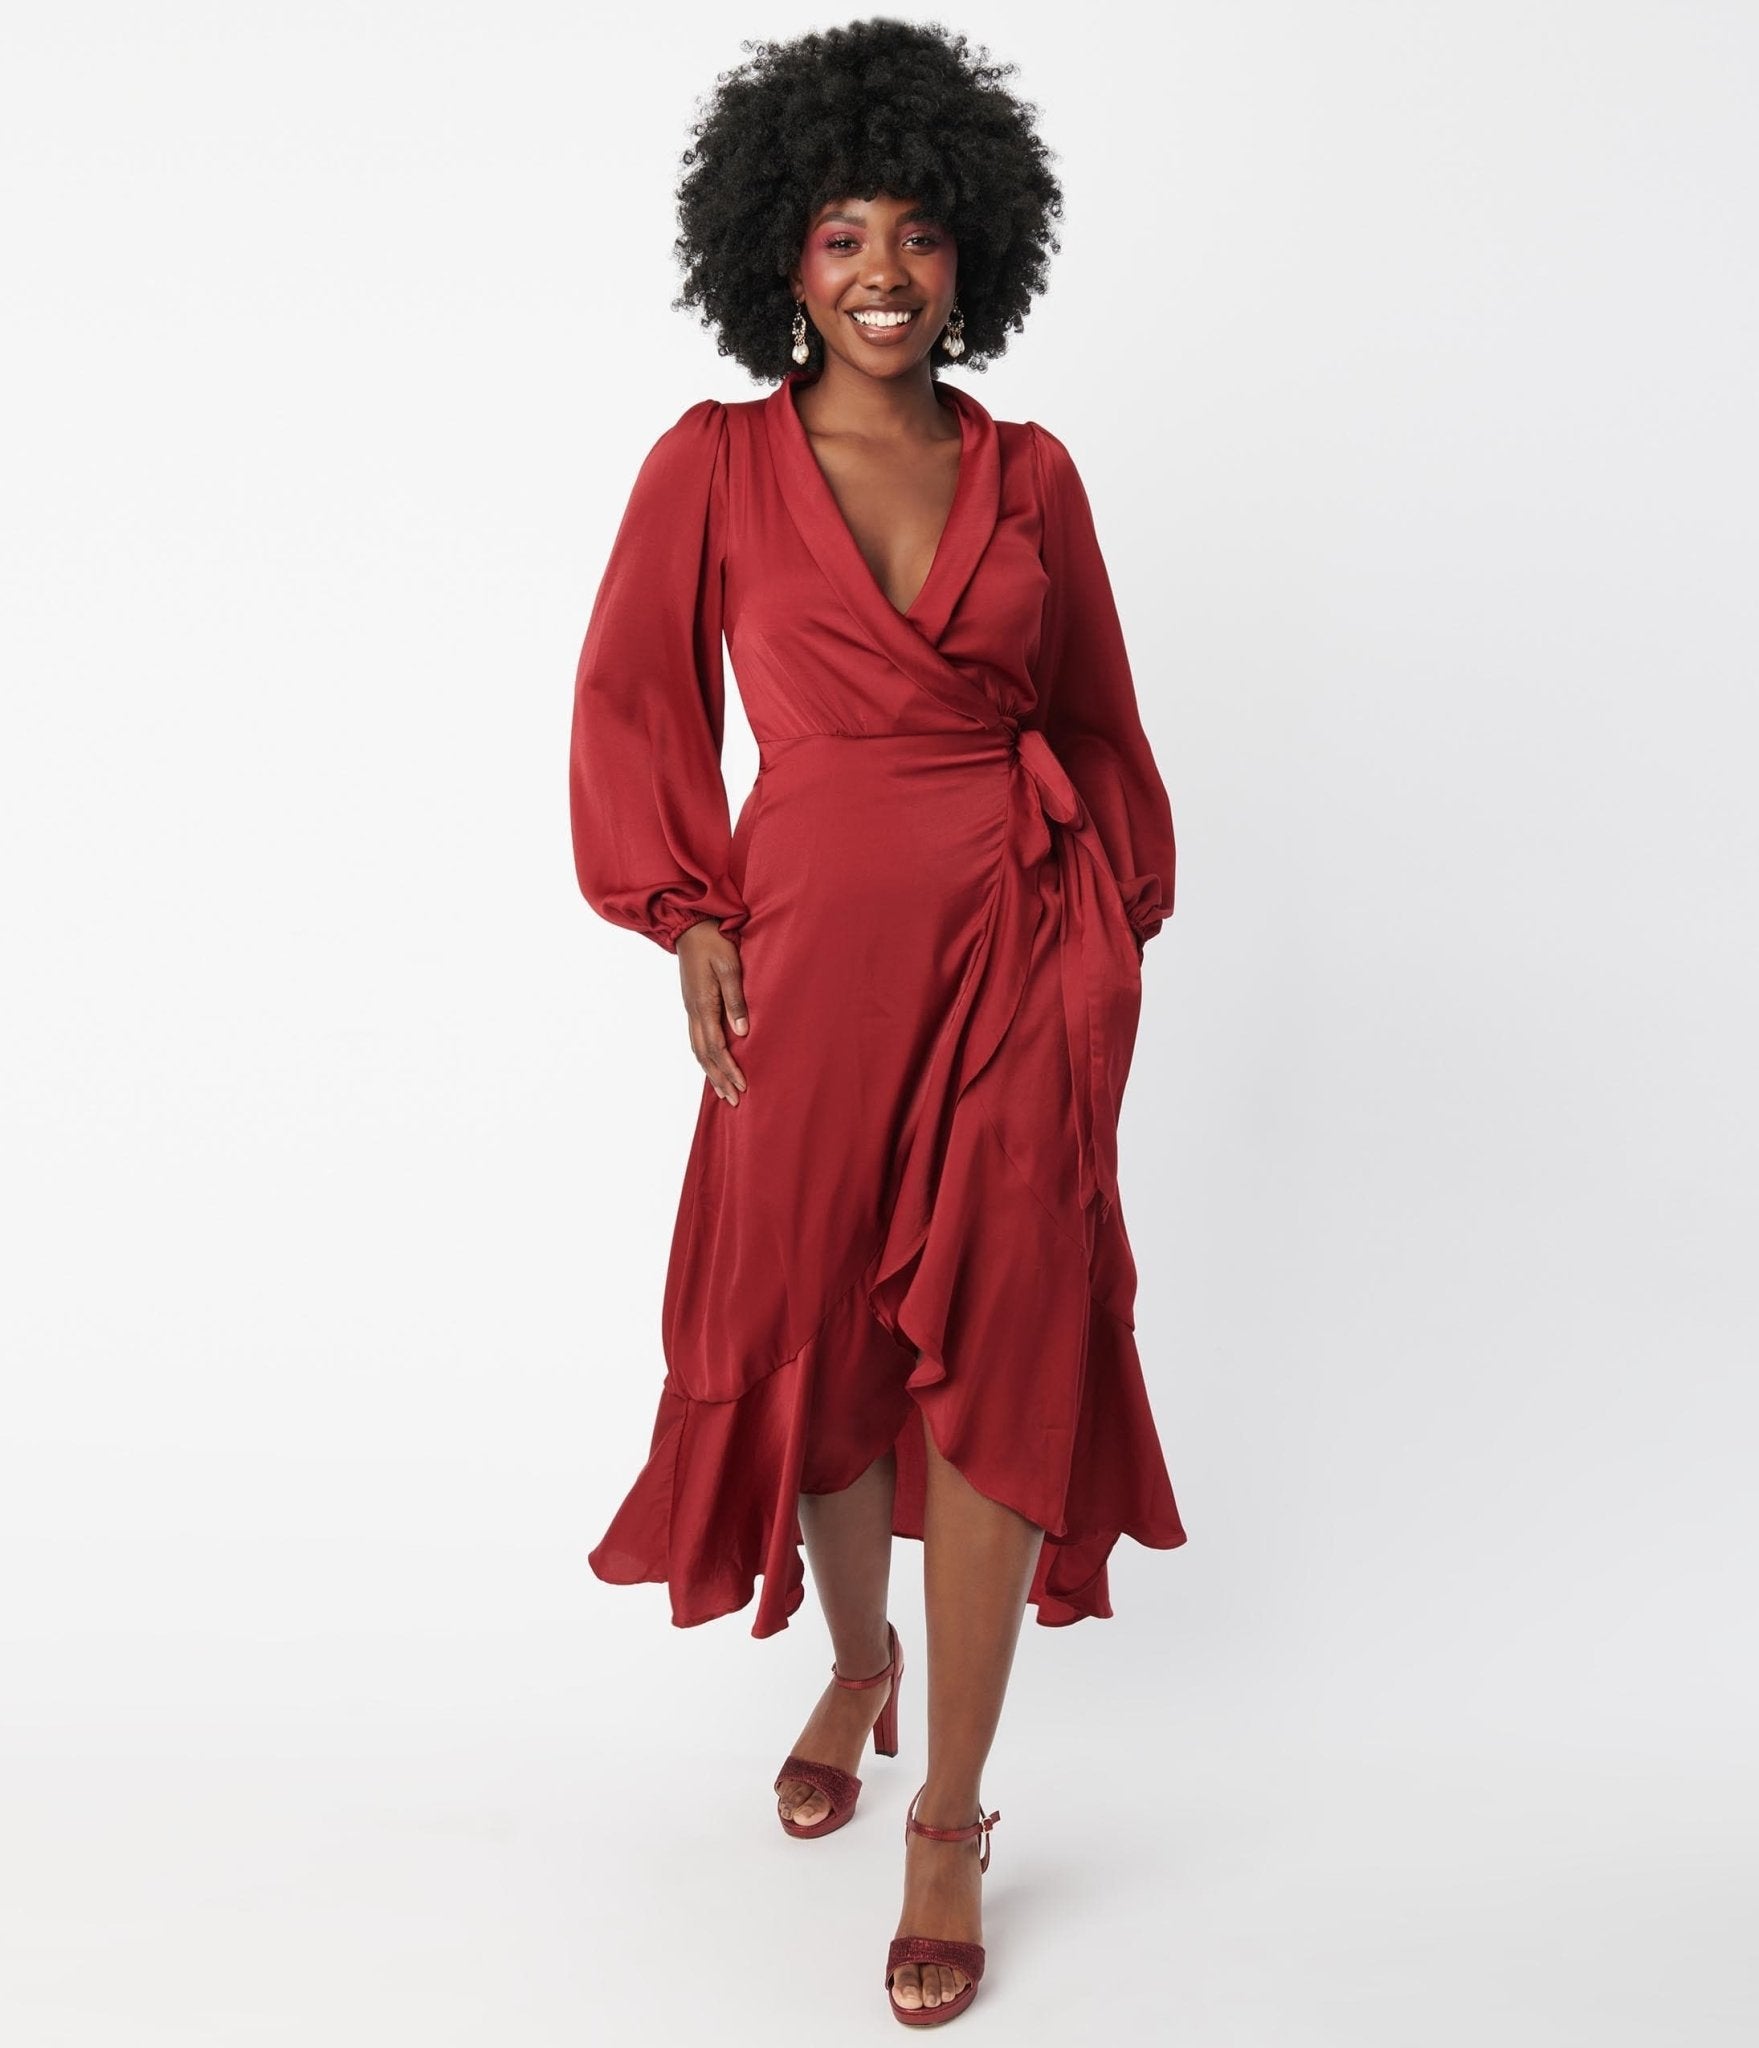 Rise to the Occasion Burgundy Midi Wrap Dress